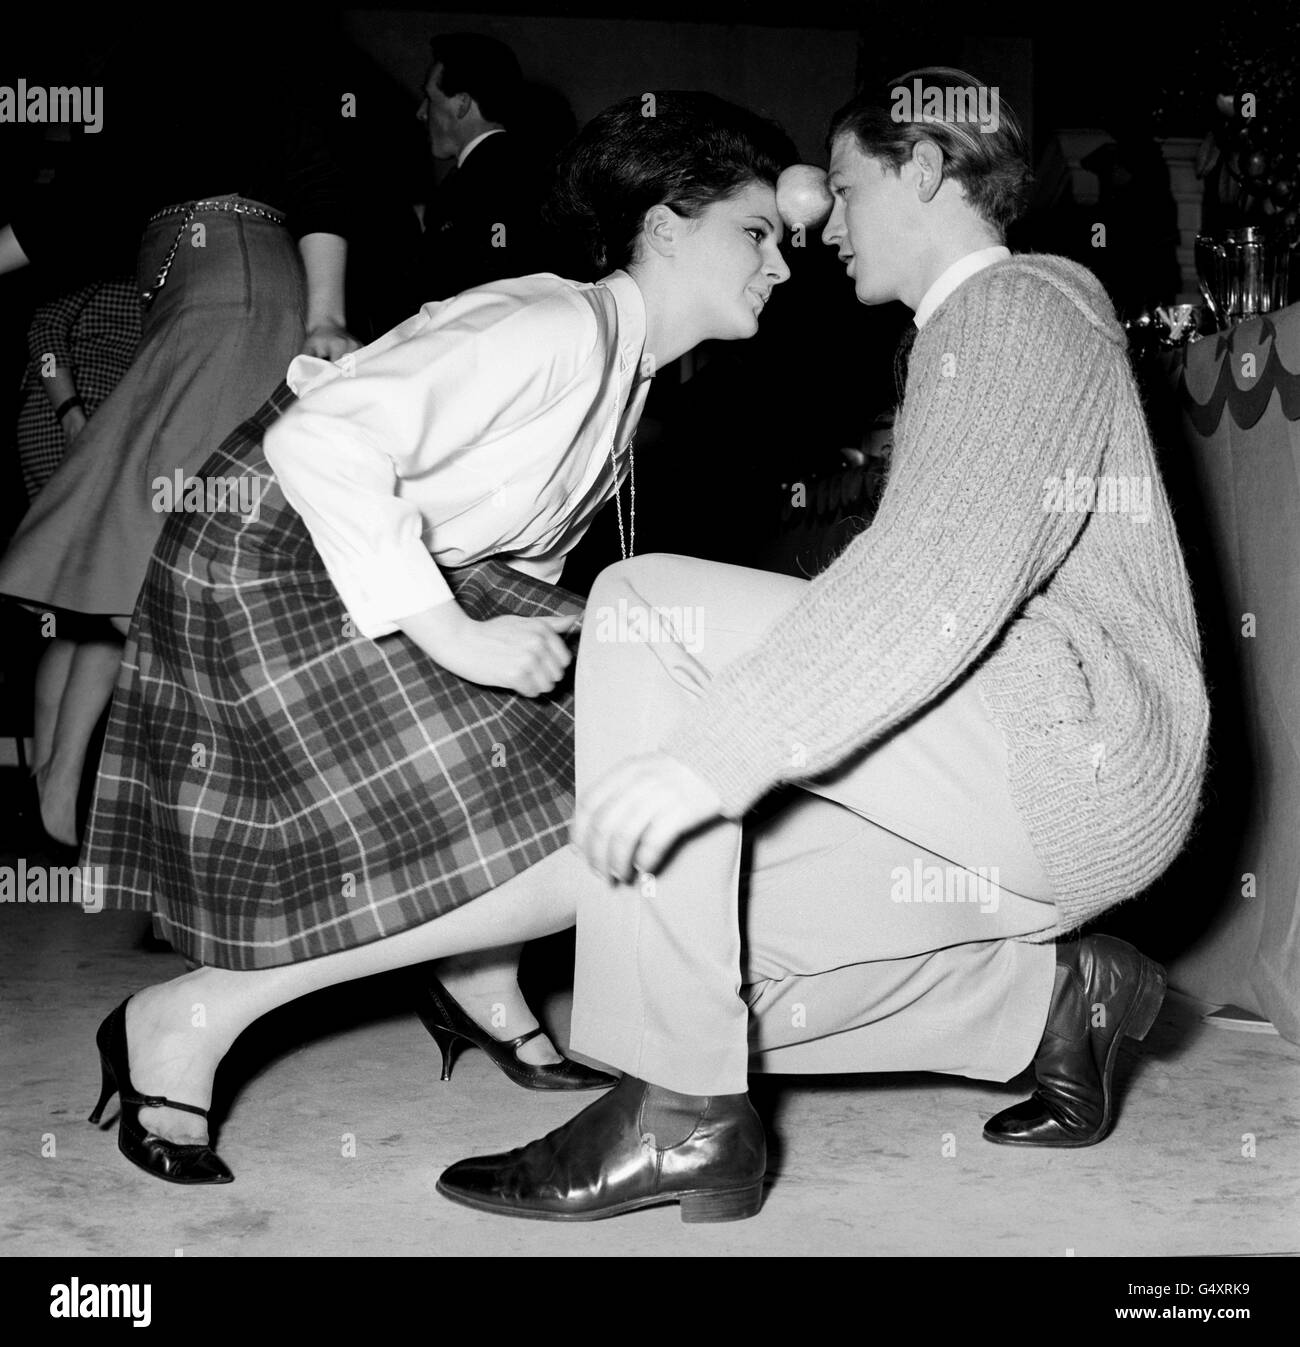 A new dance, the Apple Twist, demonstrated by Colin and Sidney Wilson at a London party. The Apple twist danced to a beat rhythm whilst the dancers have to keep the apple between their foreheads. Stock Photo